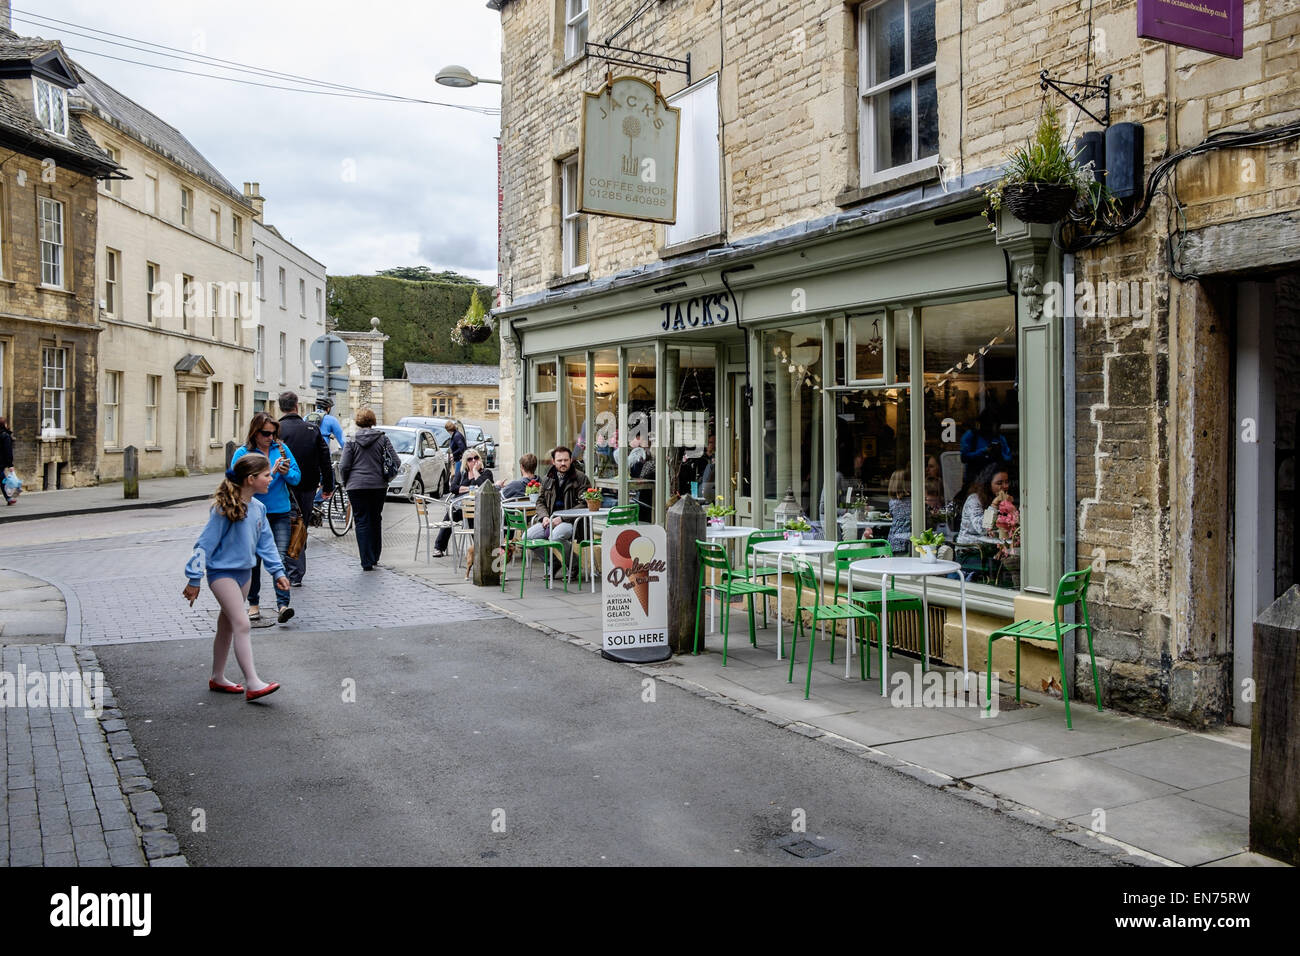 A child walks past Jack's Coffee House in Cirencester, Gloucestershire, UK. There are tables and chairs outside Stock Photo